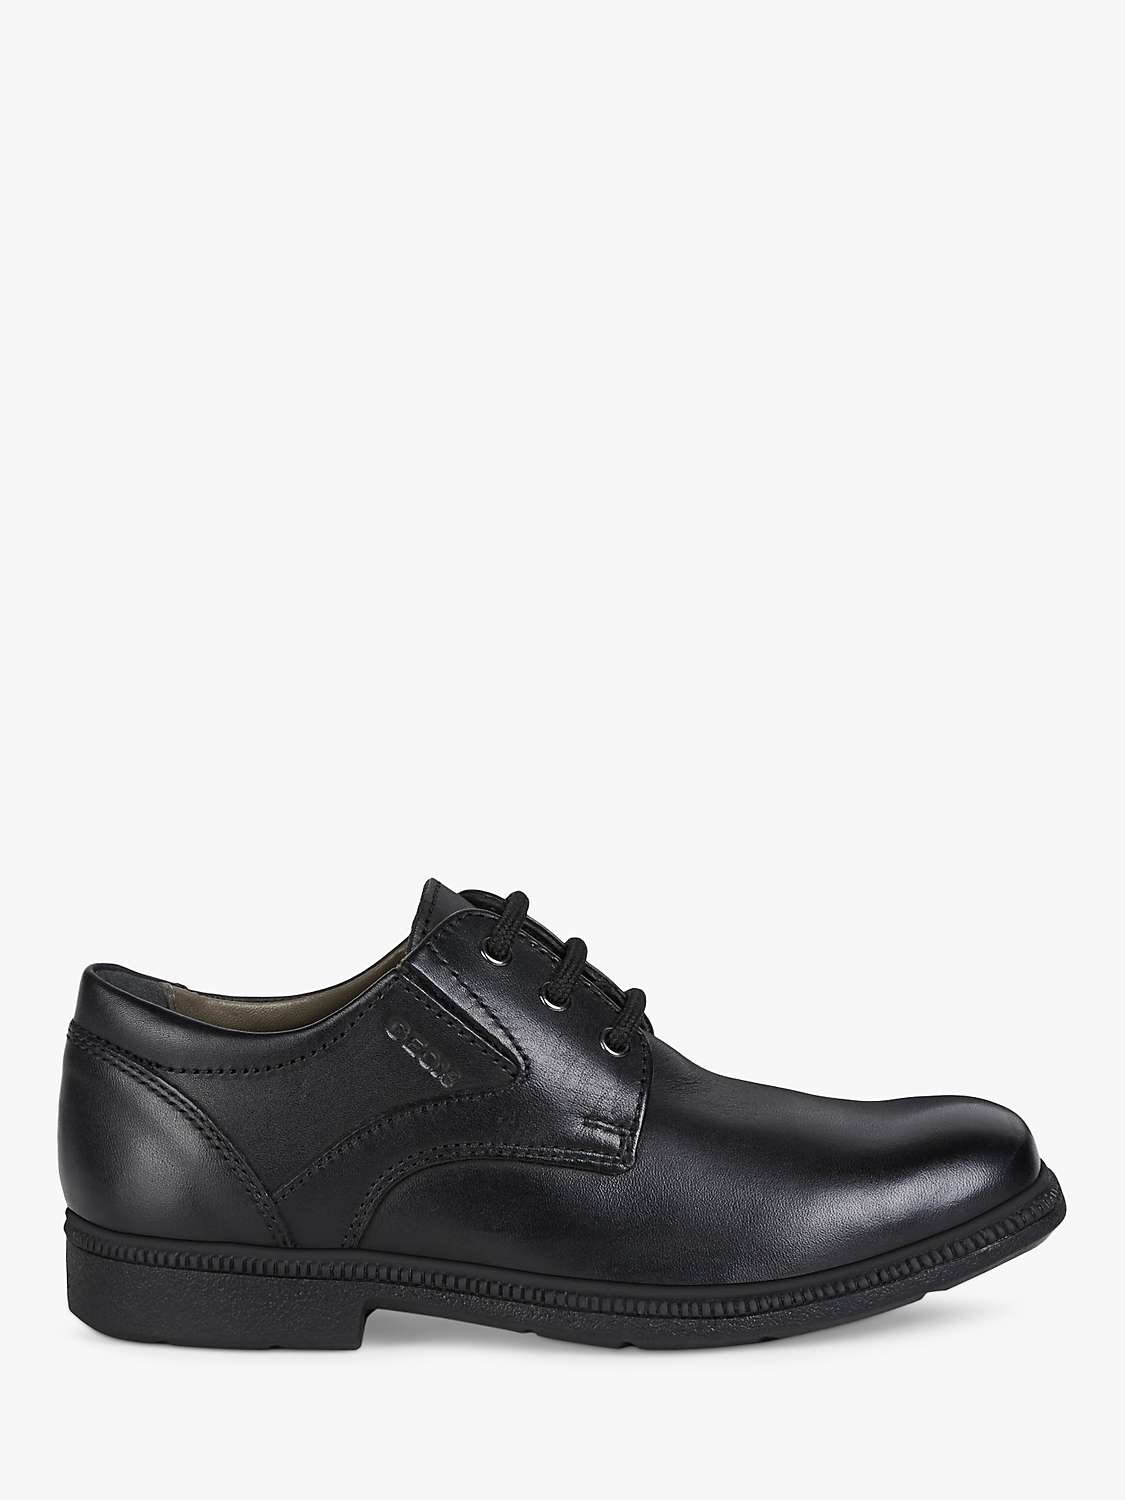 Geox Laced Shoes, Black at John Lewis & Partners